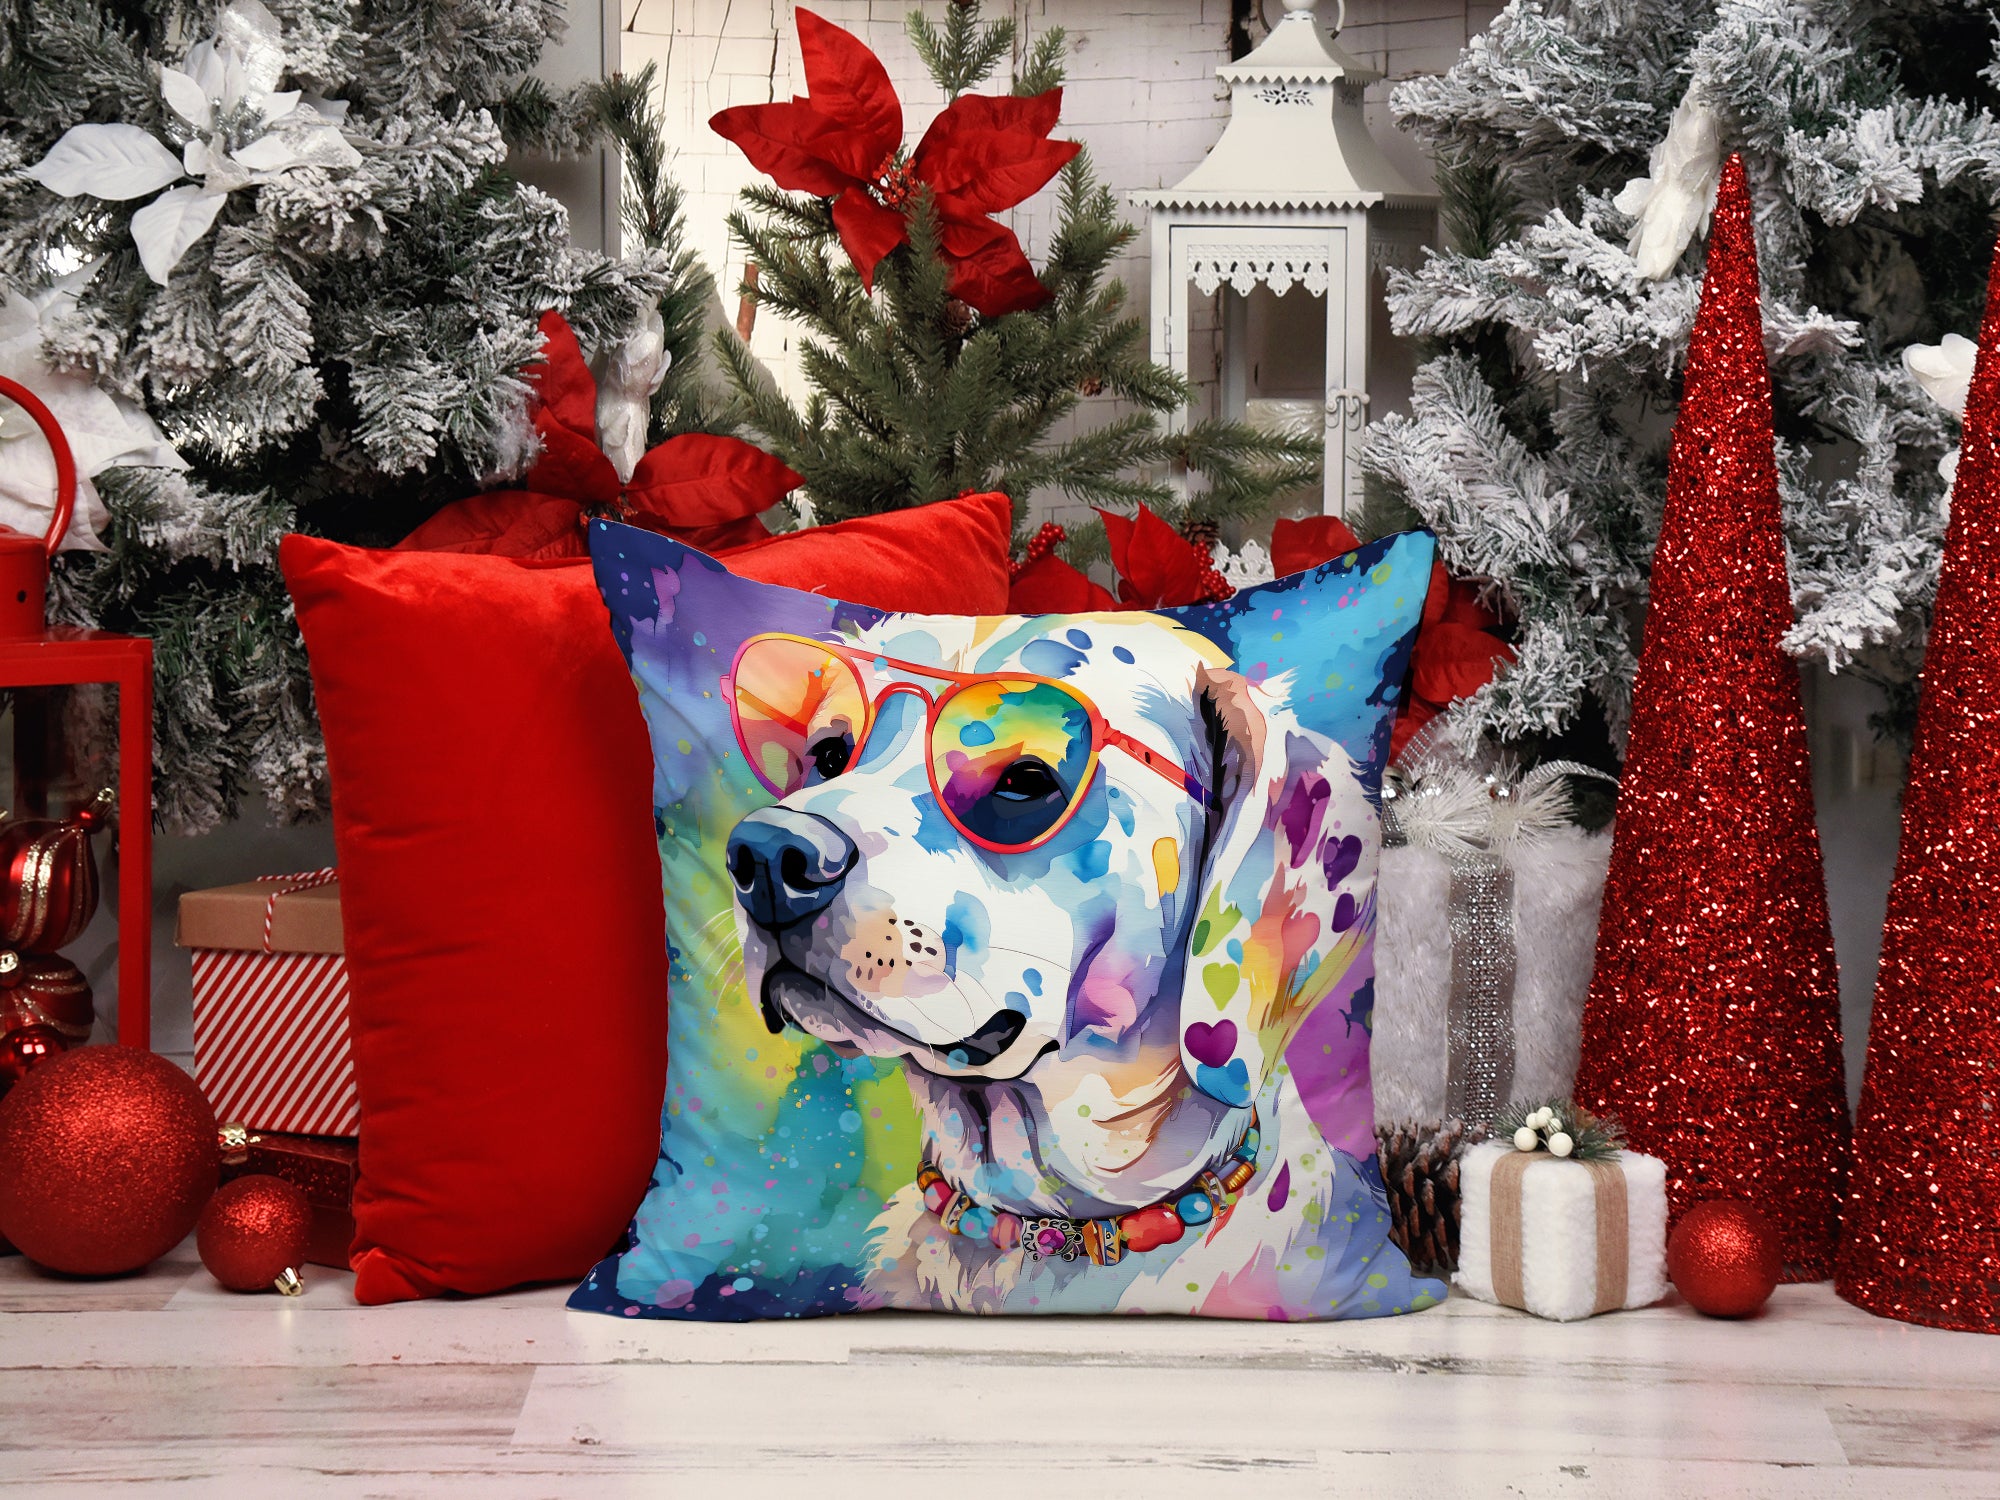 Buy this Hippie Dawg Fabric Decorative Pillow